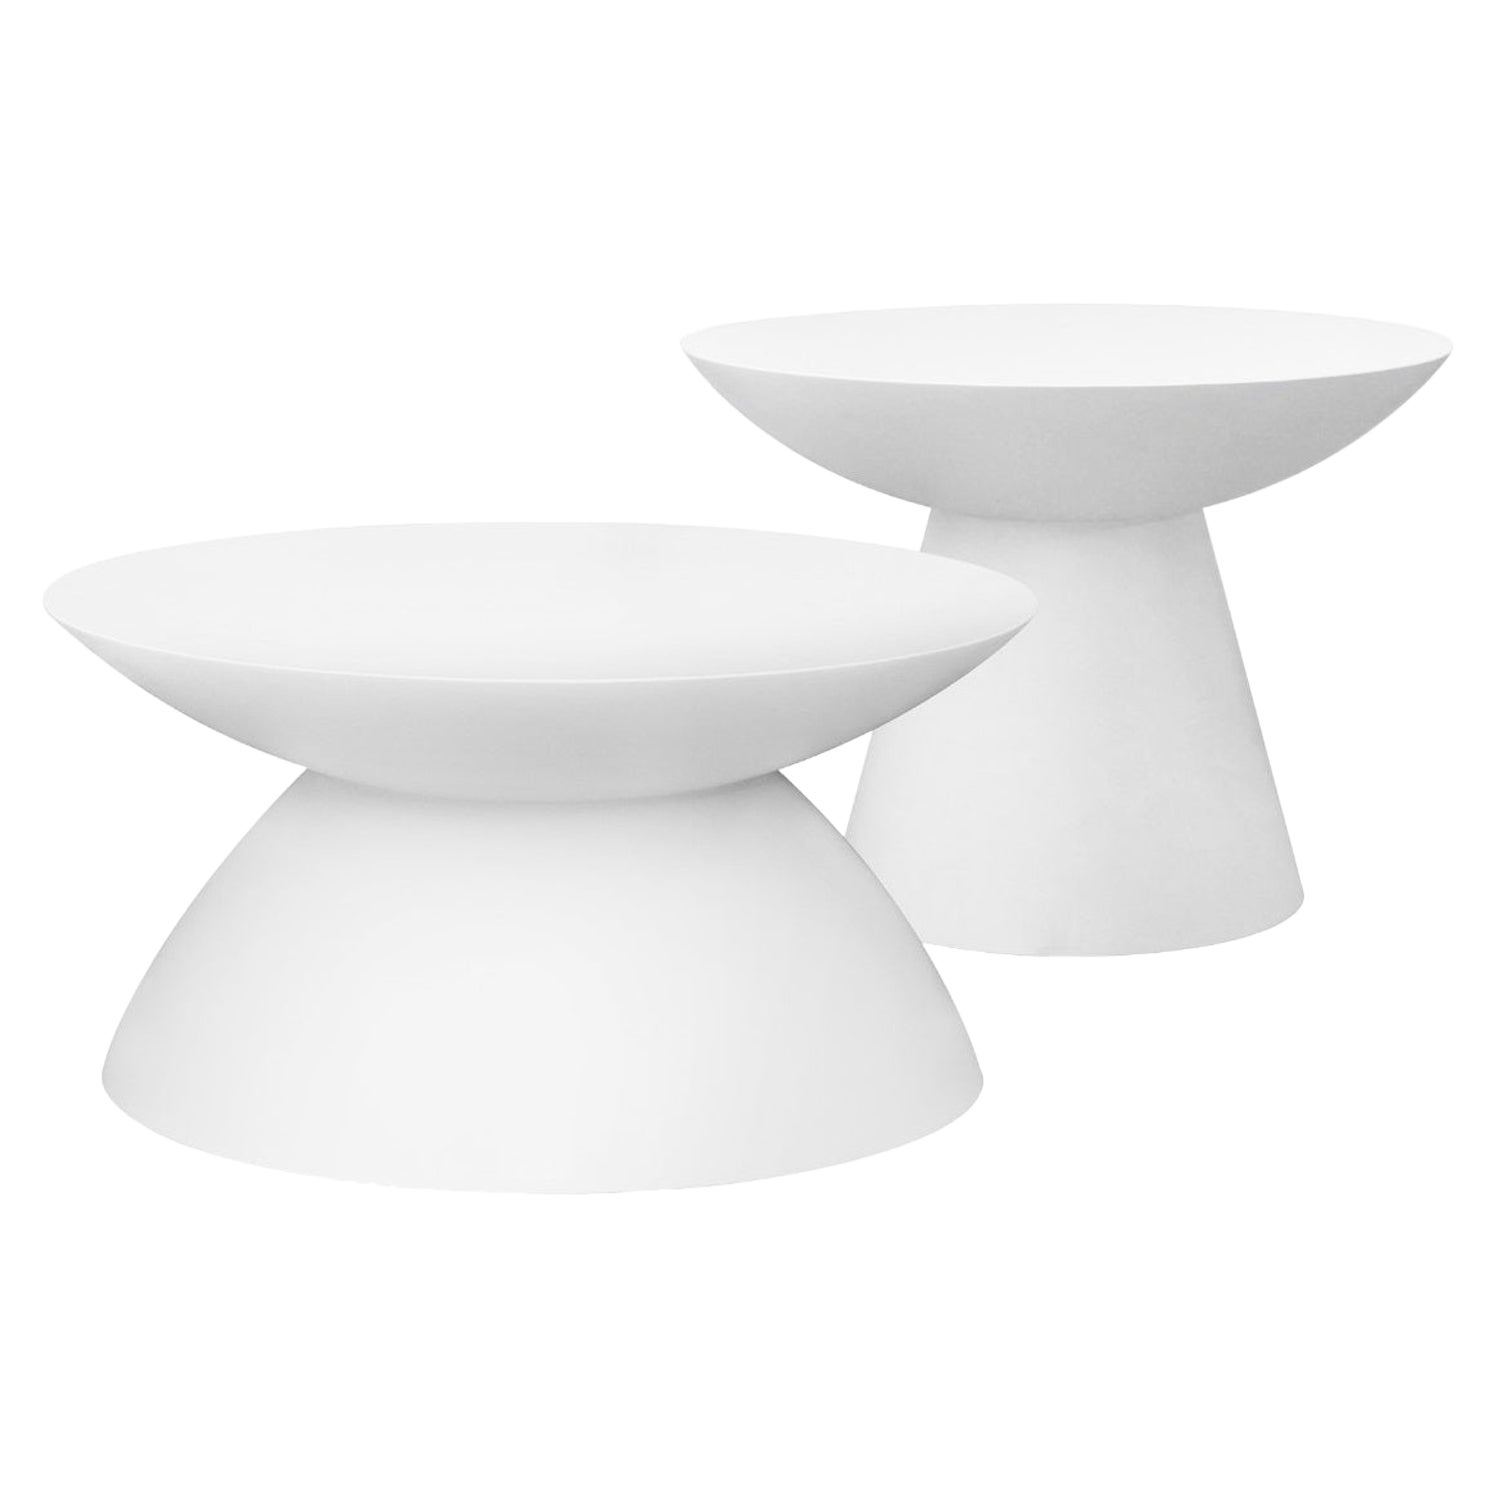 In/Out Coffee Table Set of 2 Pieces Lacquered in White